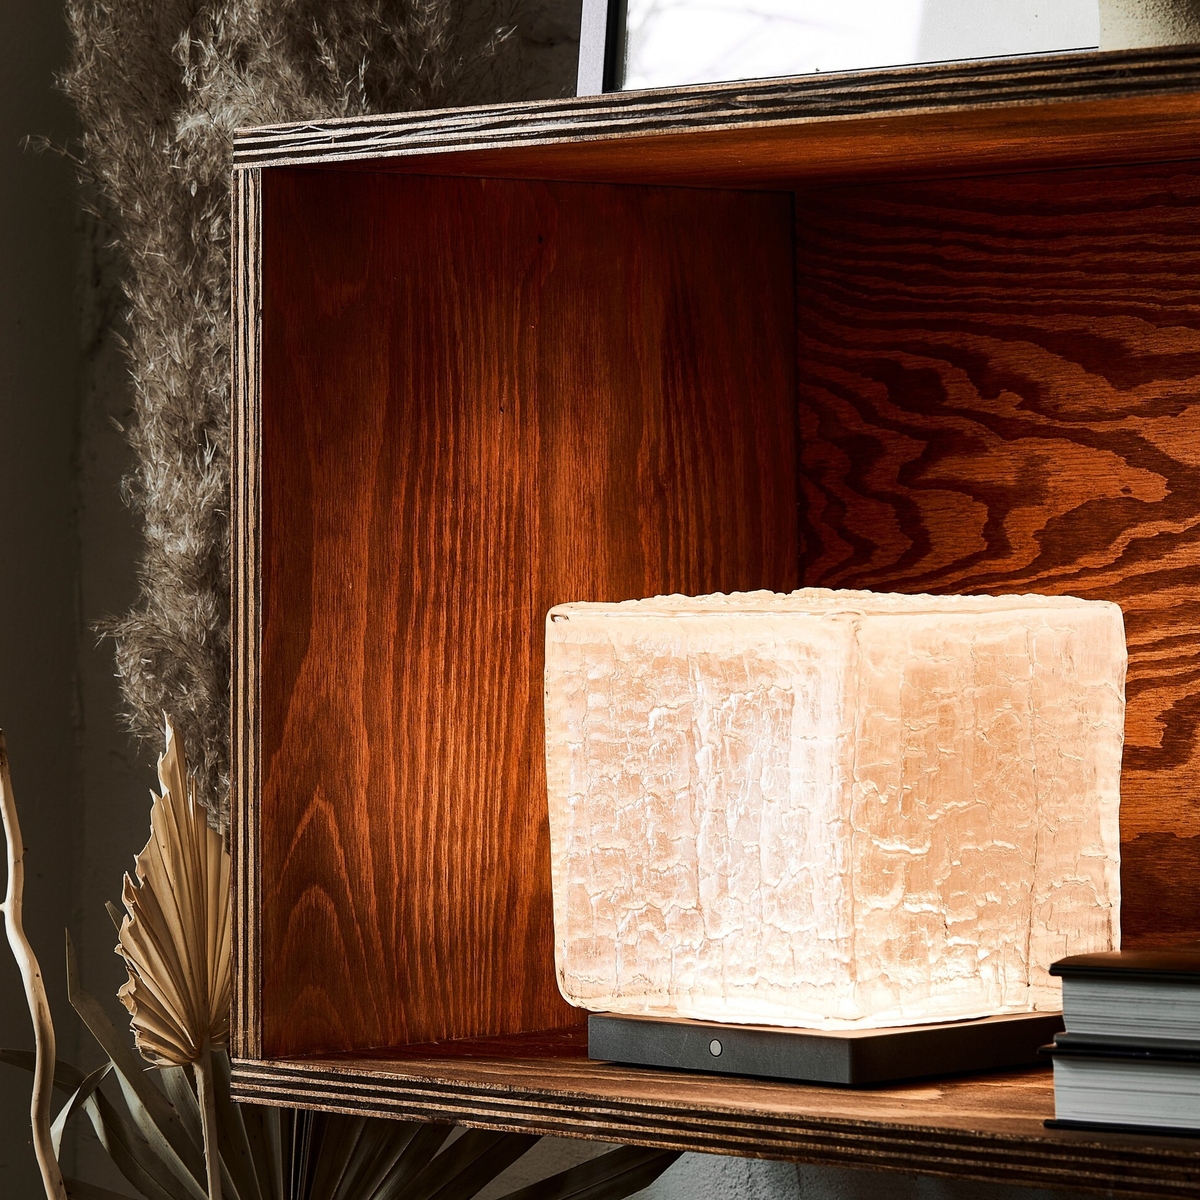 Ice cube-shaped table lamp inside wooden shelving unit